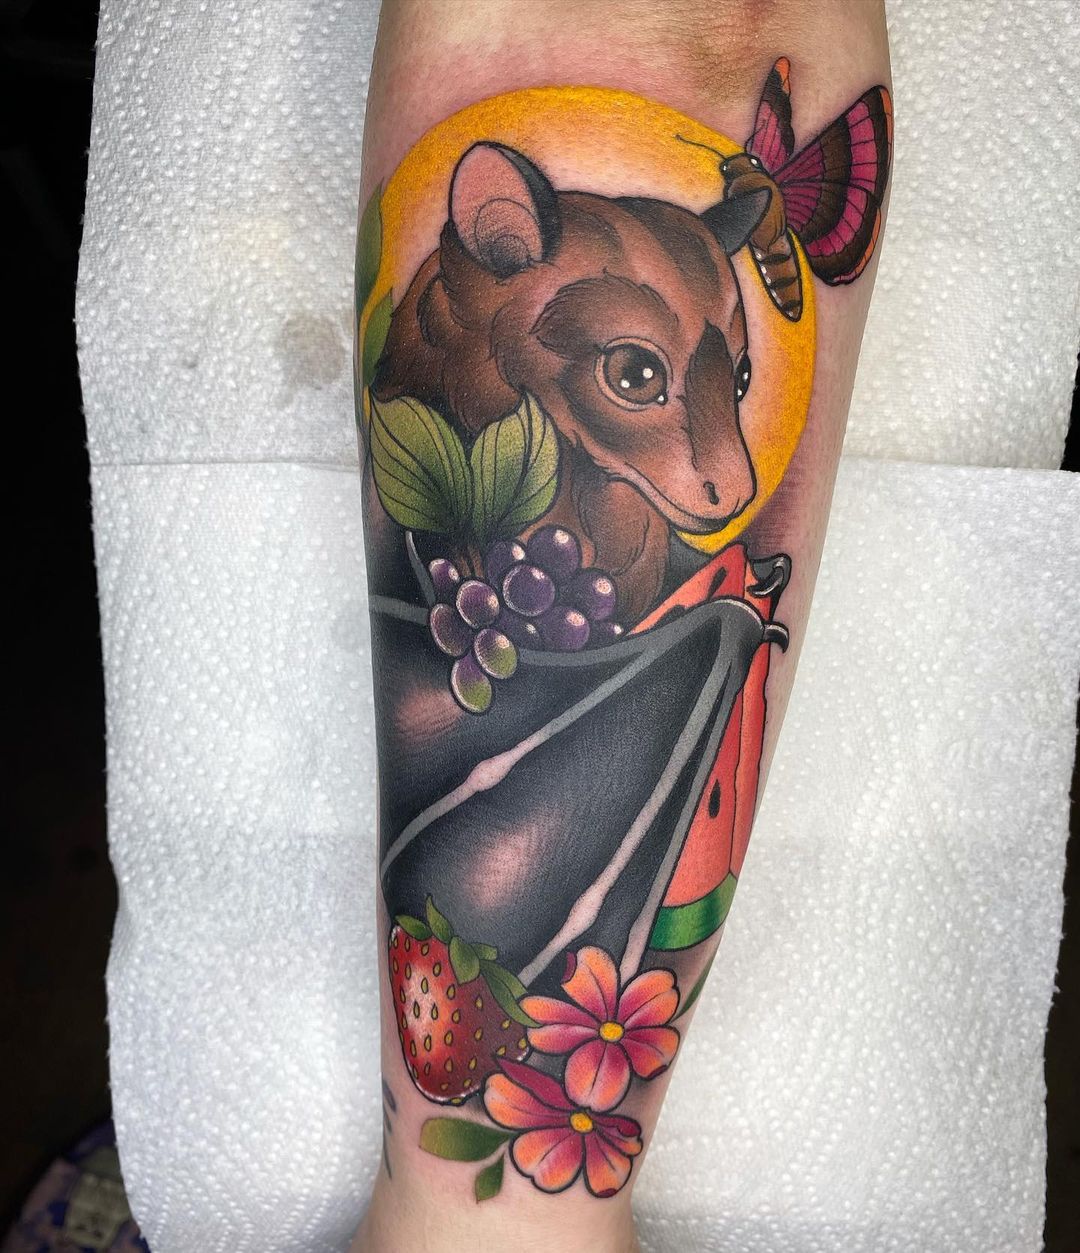 Keep The Faith Social Club  Busting that neotrad scene wide open with  this beautiful upside down night dog AKA Bat by Harry You know you need a  new tattoo and you